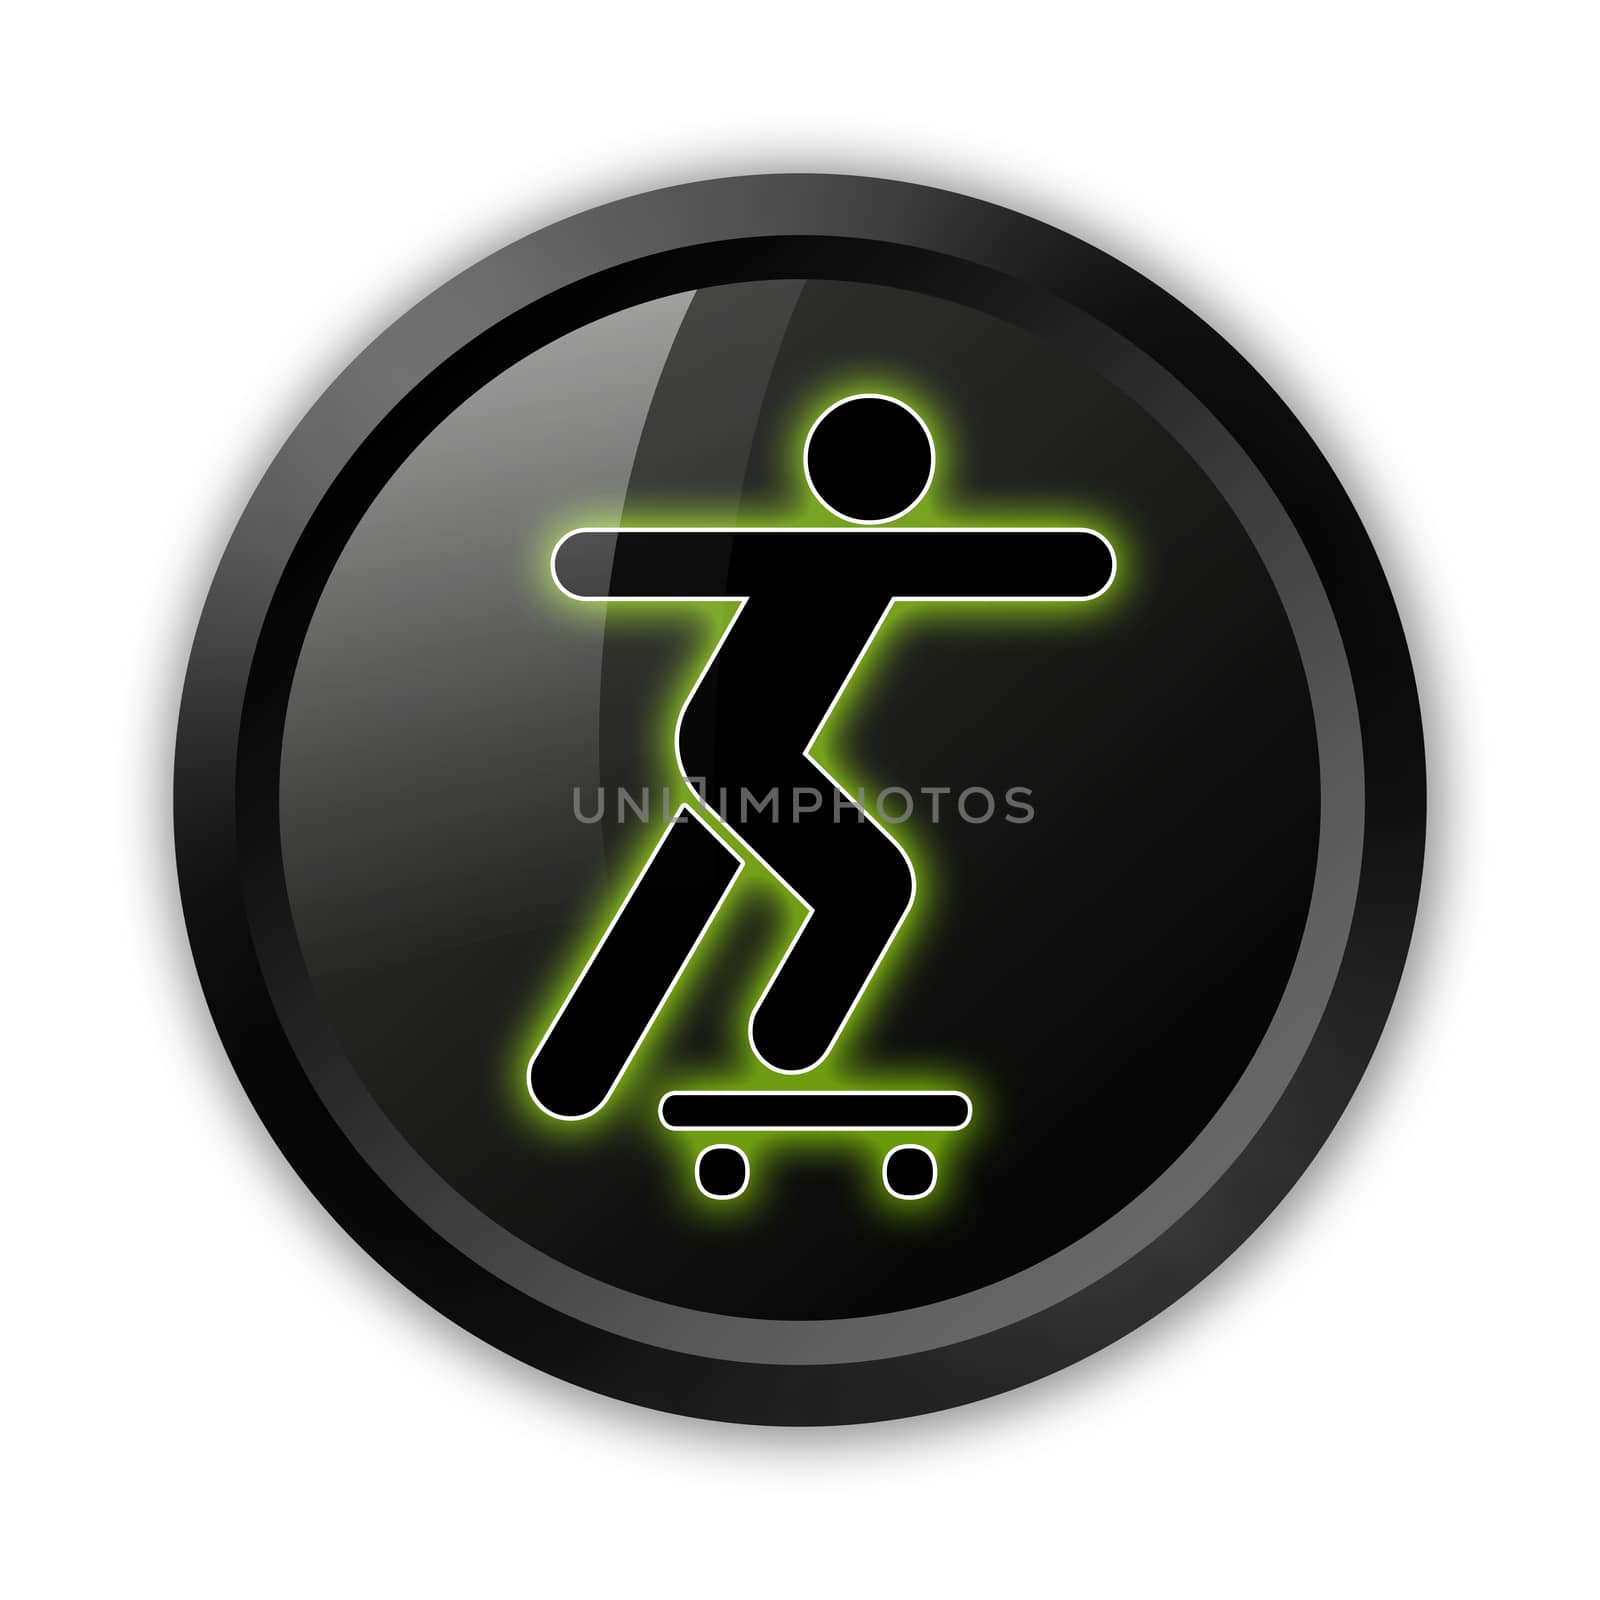 Icon, Button, Pictogram with Skateboarding symbol